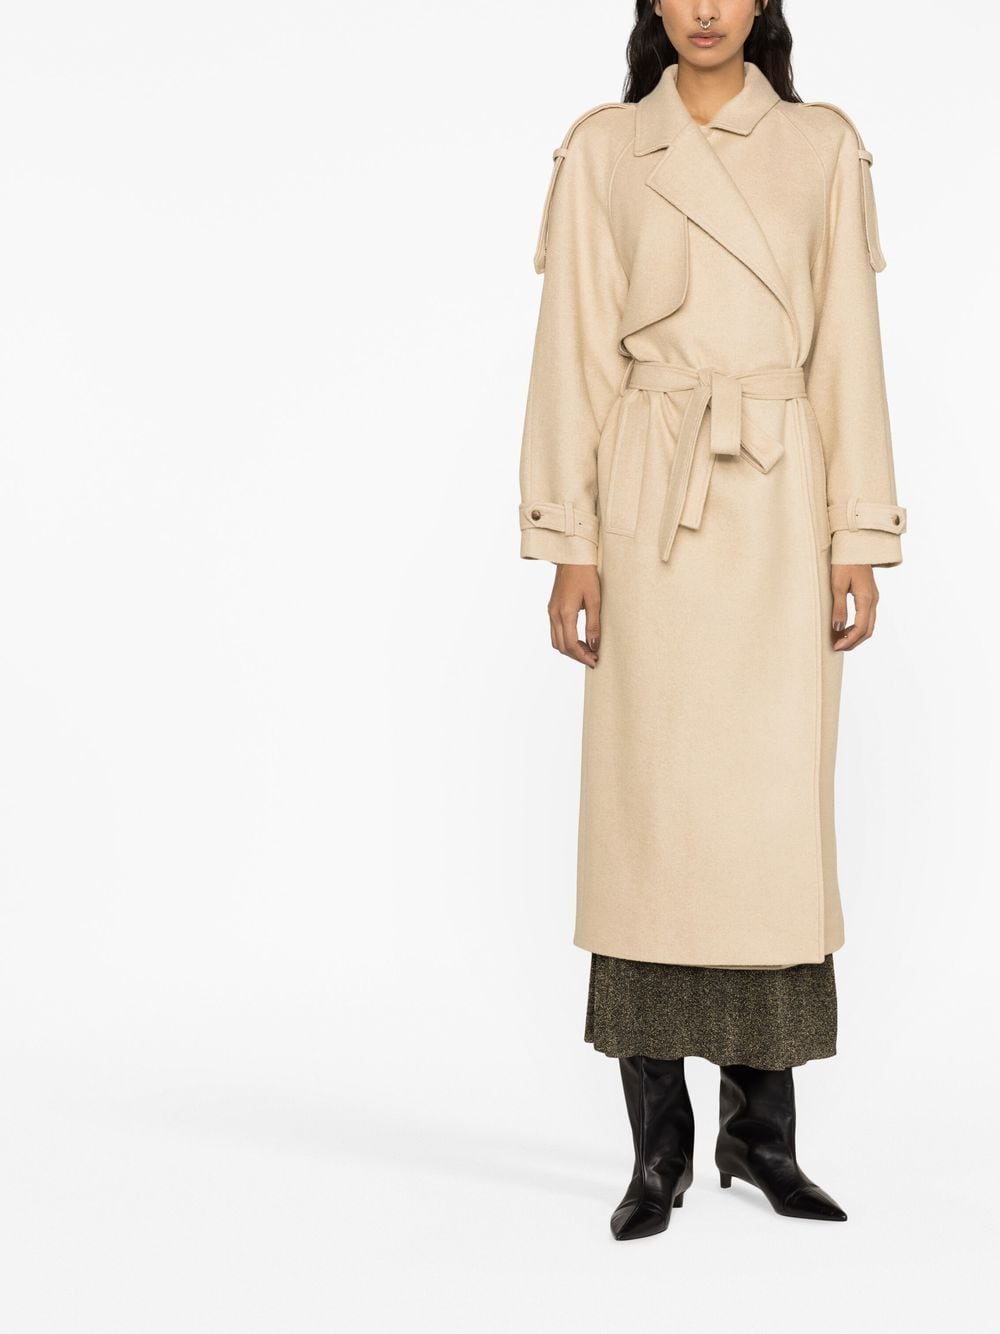 The Frankie Shop Suzanne Belted Trench Coat Farfetch